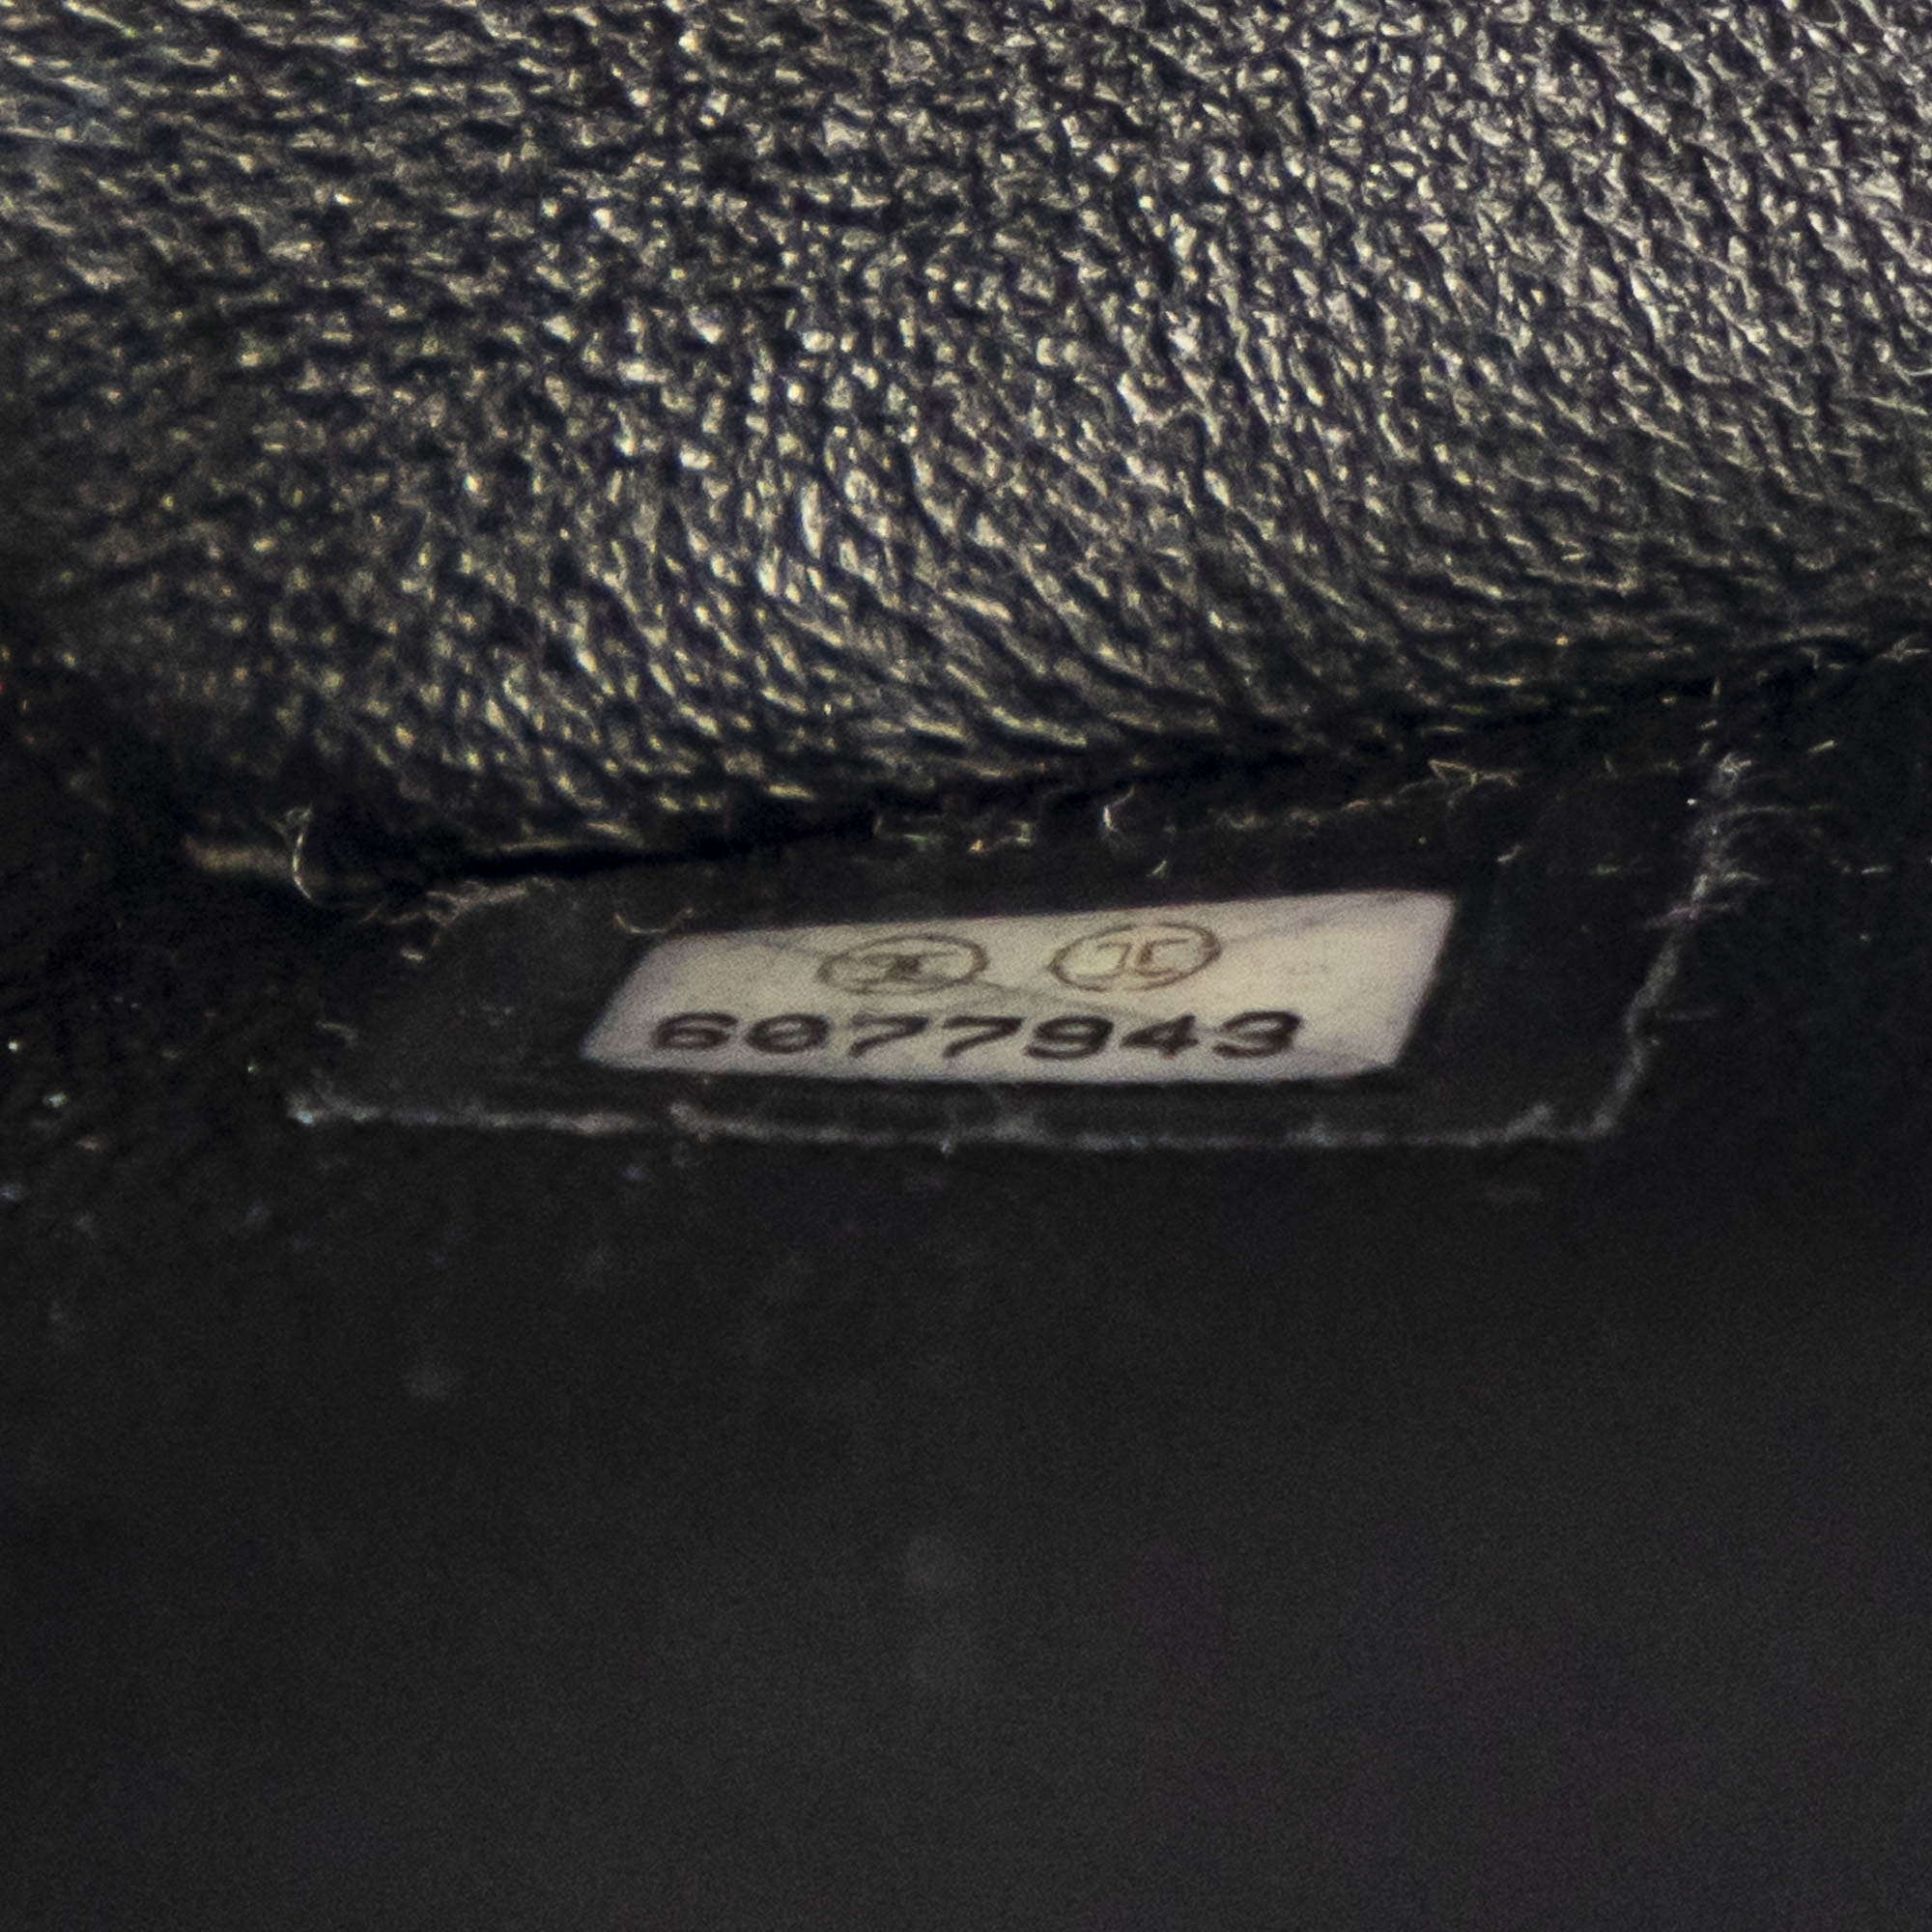 chanel bag without serial number